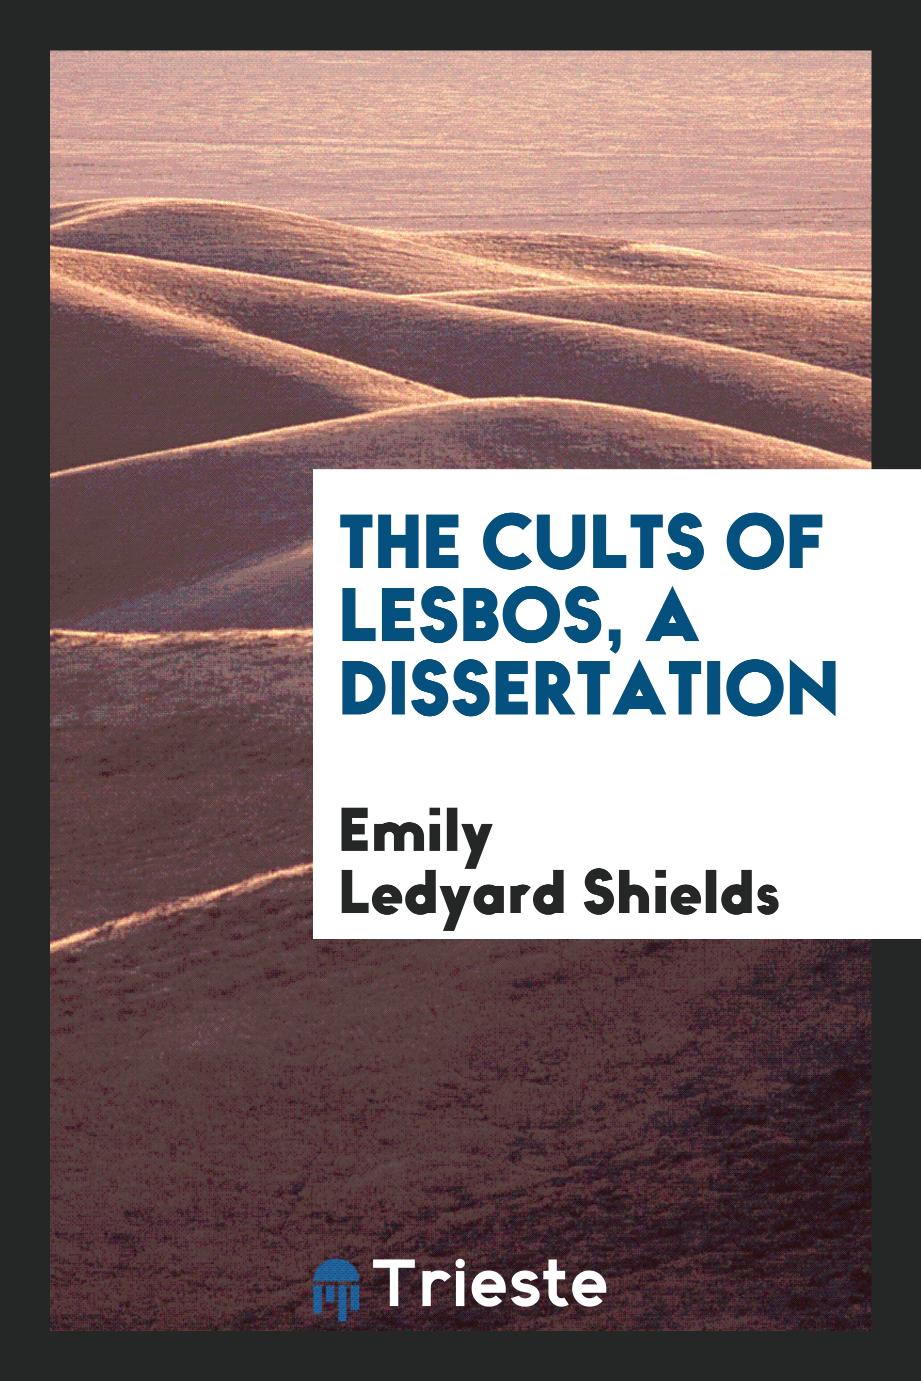 The Cults of Lesbos, a Dissertation